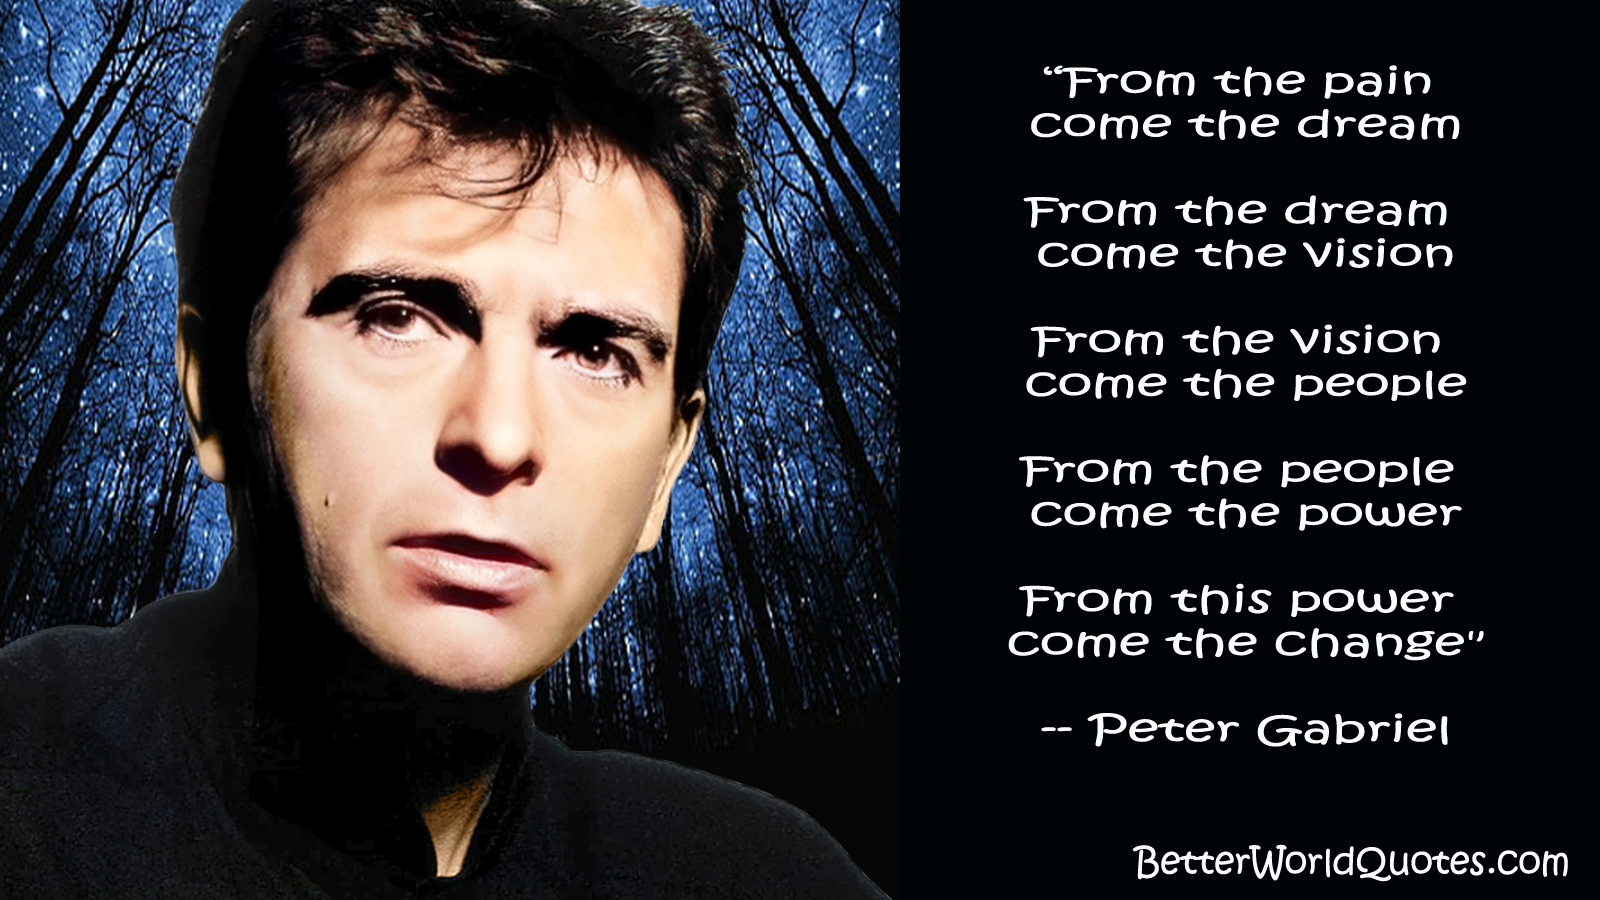 From the pain come the dream -- Peter Gabriel